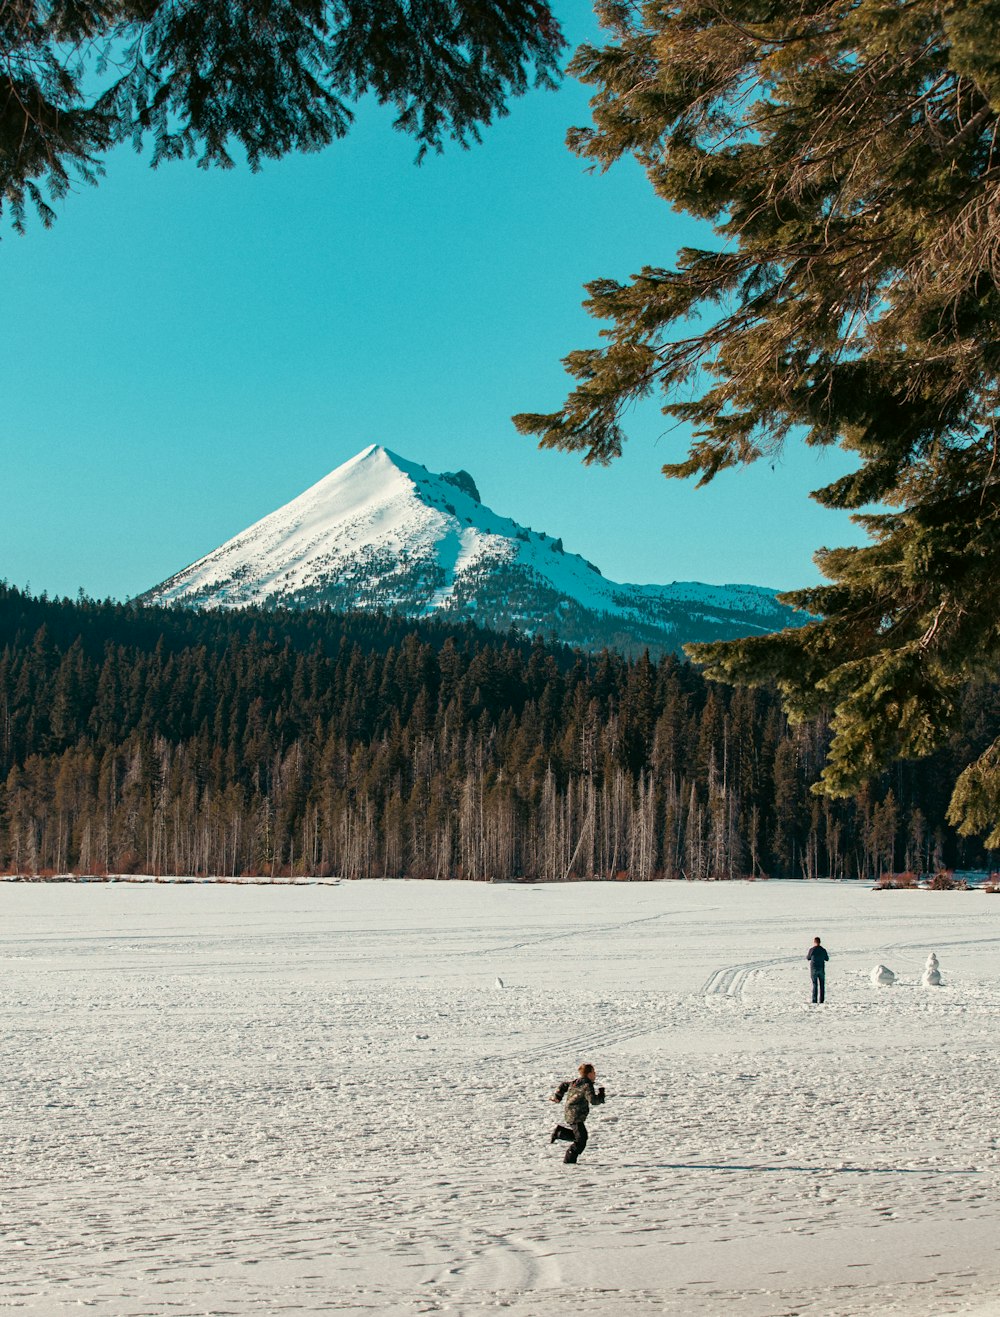 a person riding a snowboard across a snow covered field